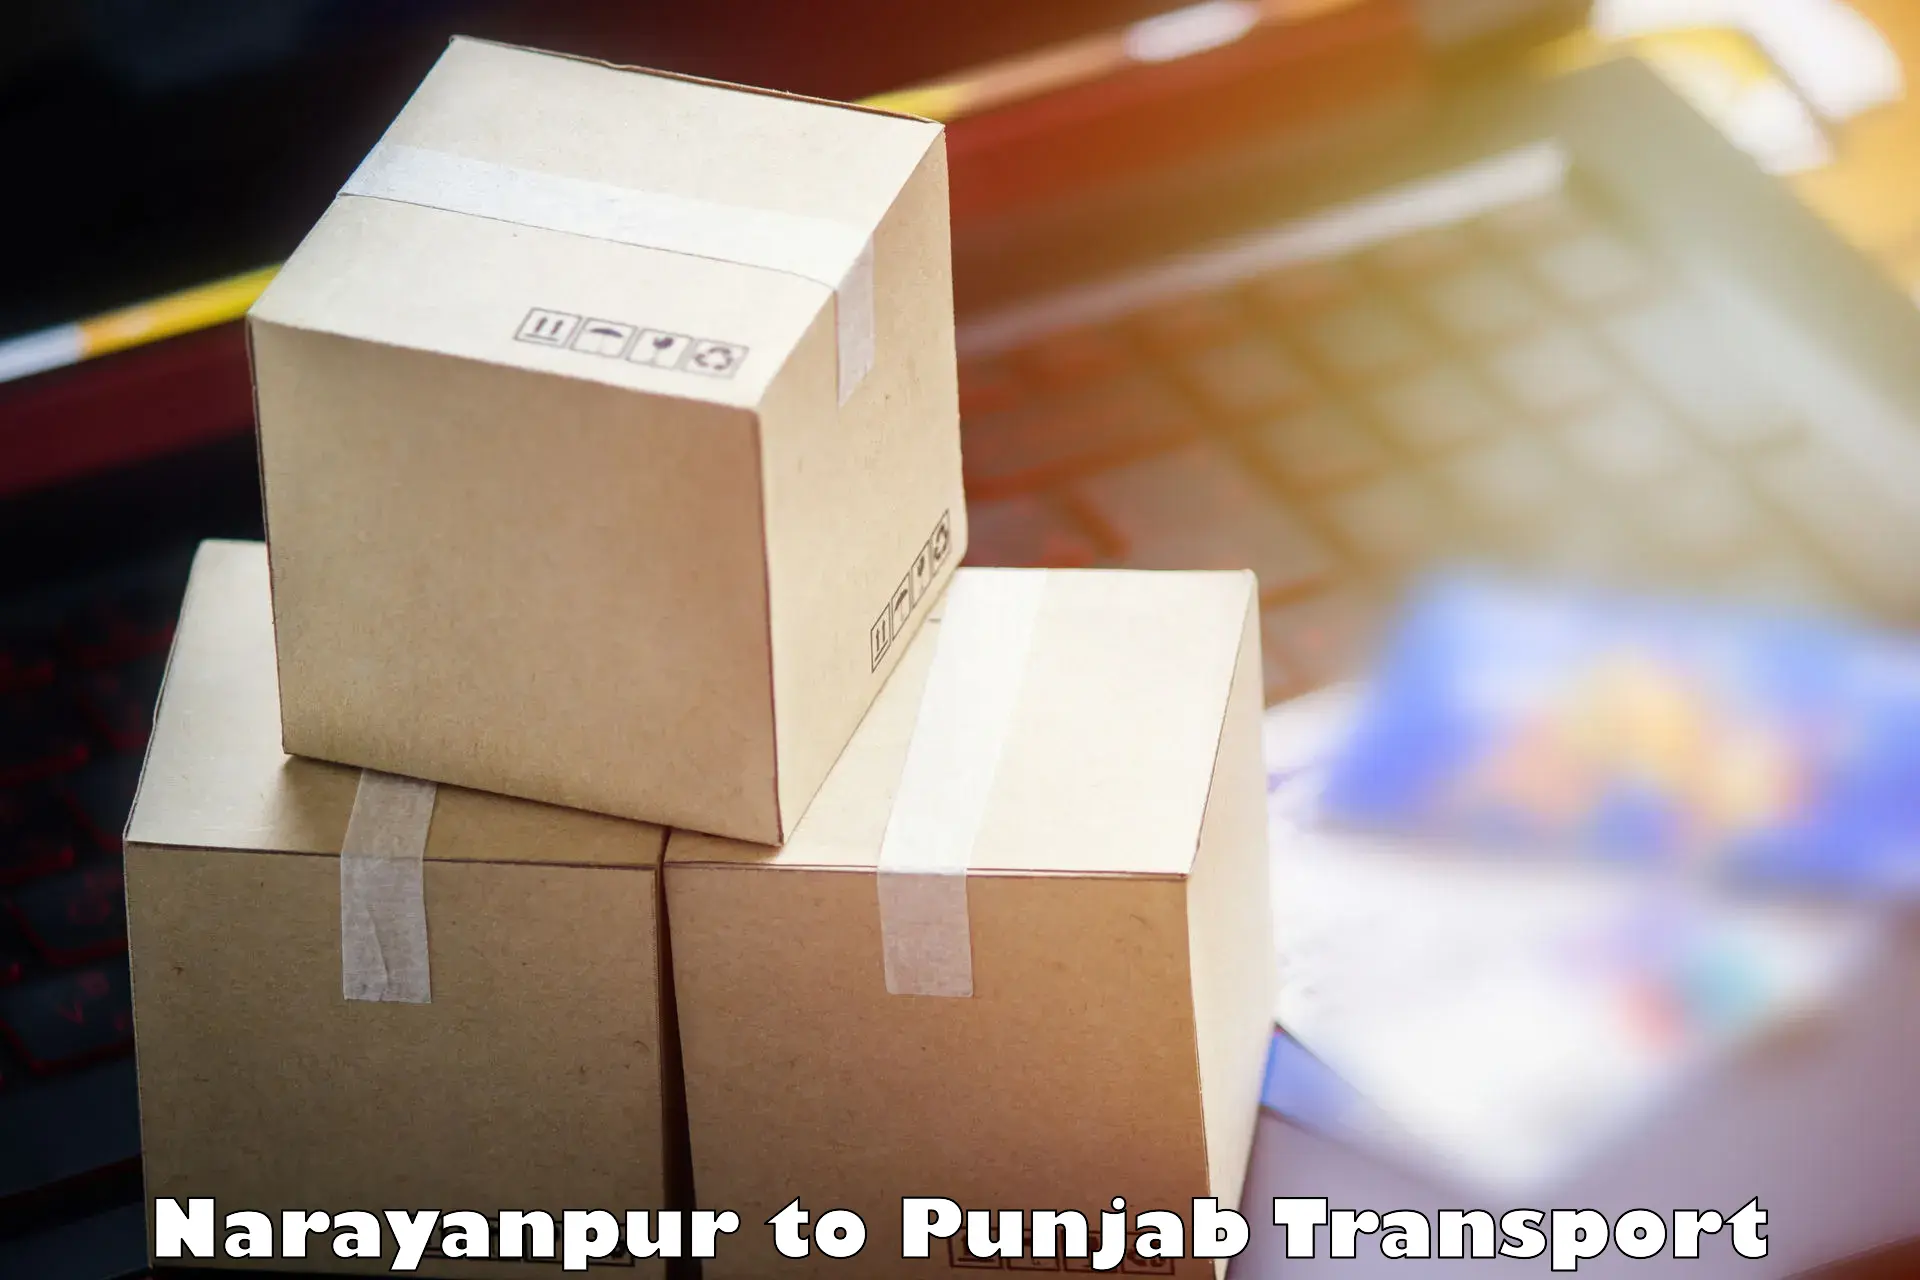 Container transportation services Narayanpur to Talwandi Sabo